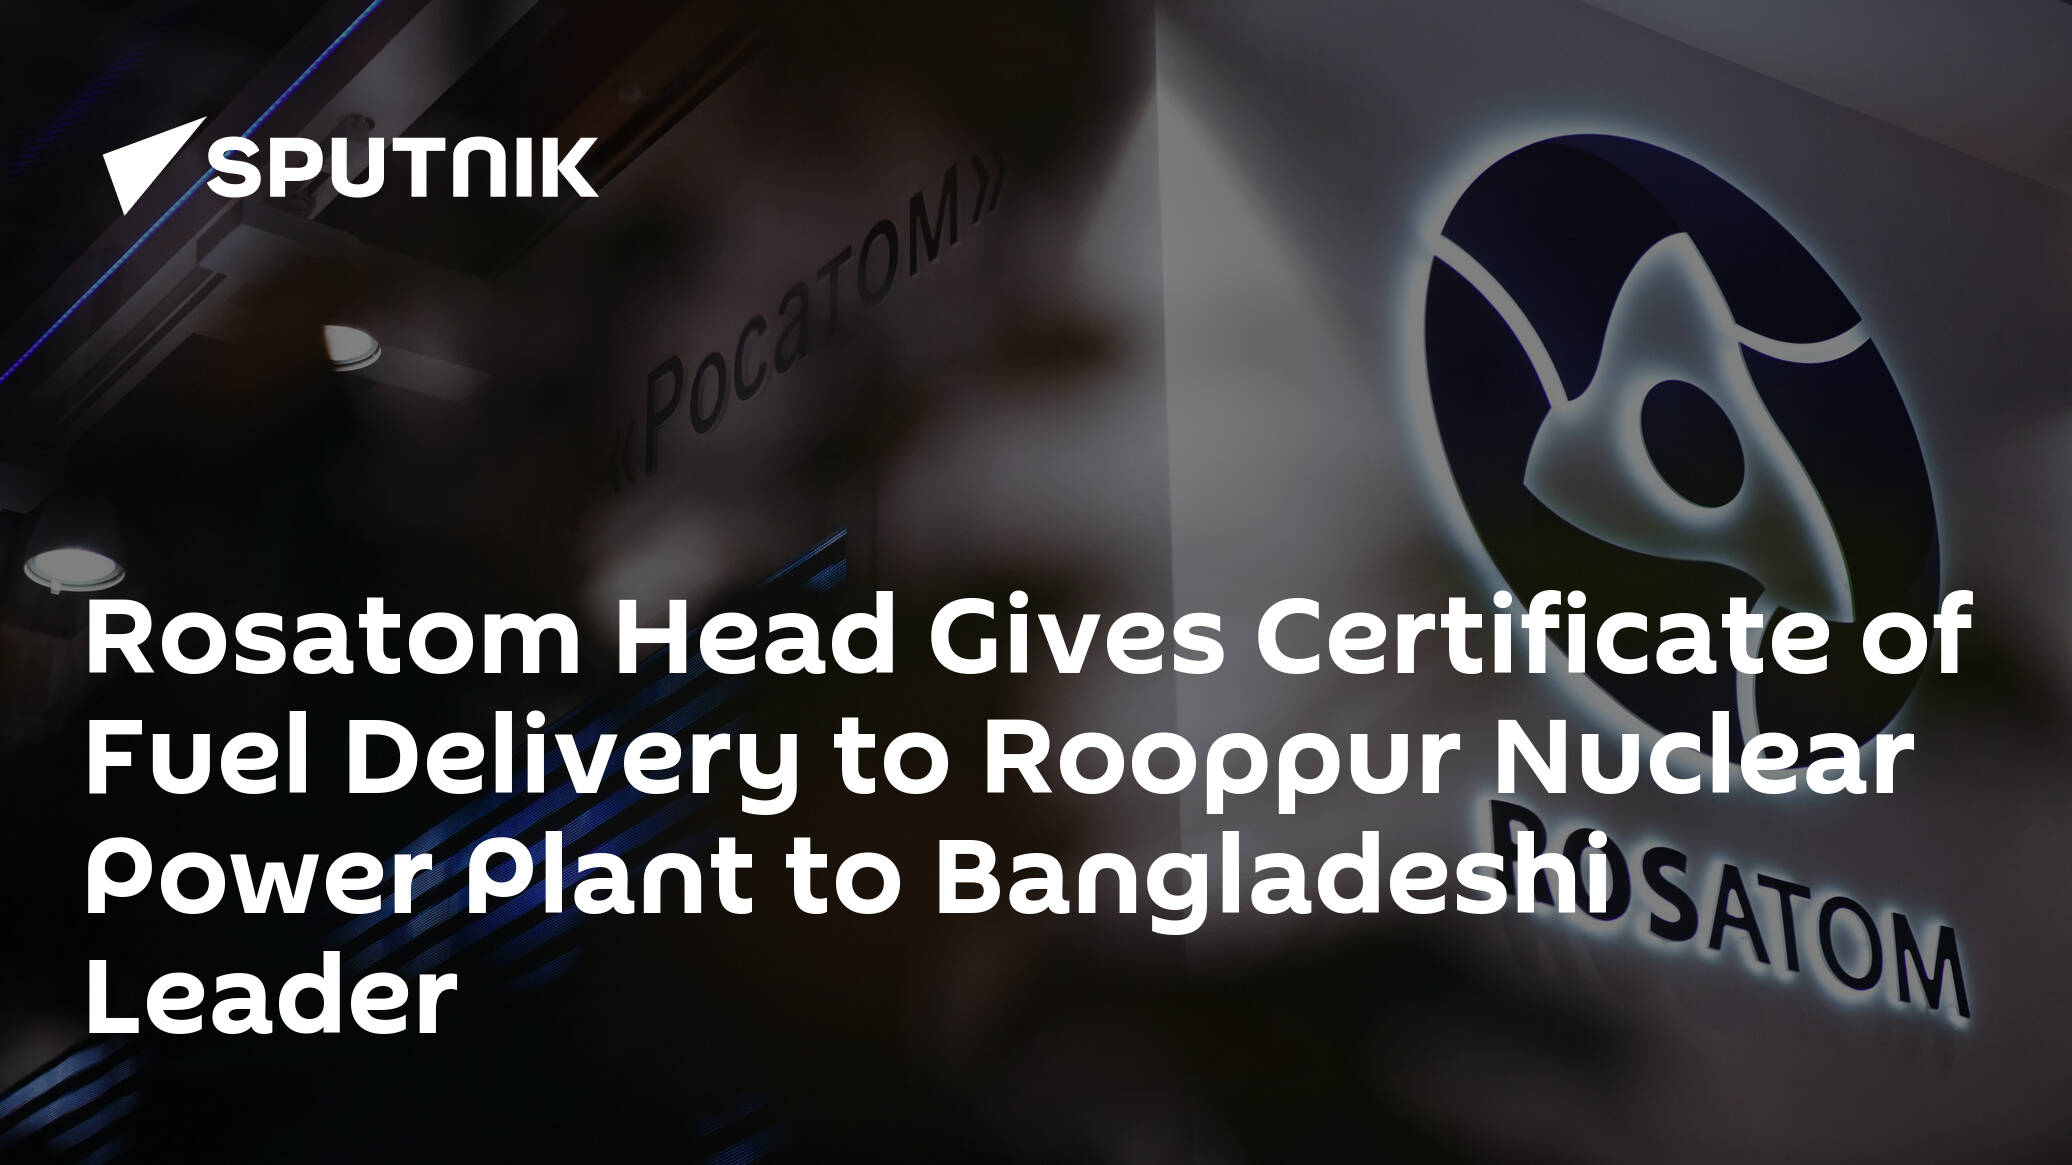 Rosatom Head Gives Certificate of Fuel Delivery to Rooppur Nuclear Power Plant to Bangladeshi Leader